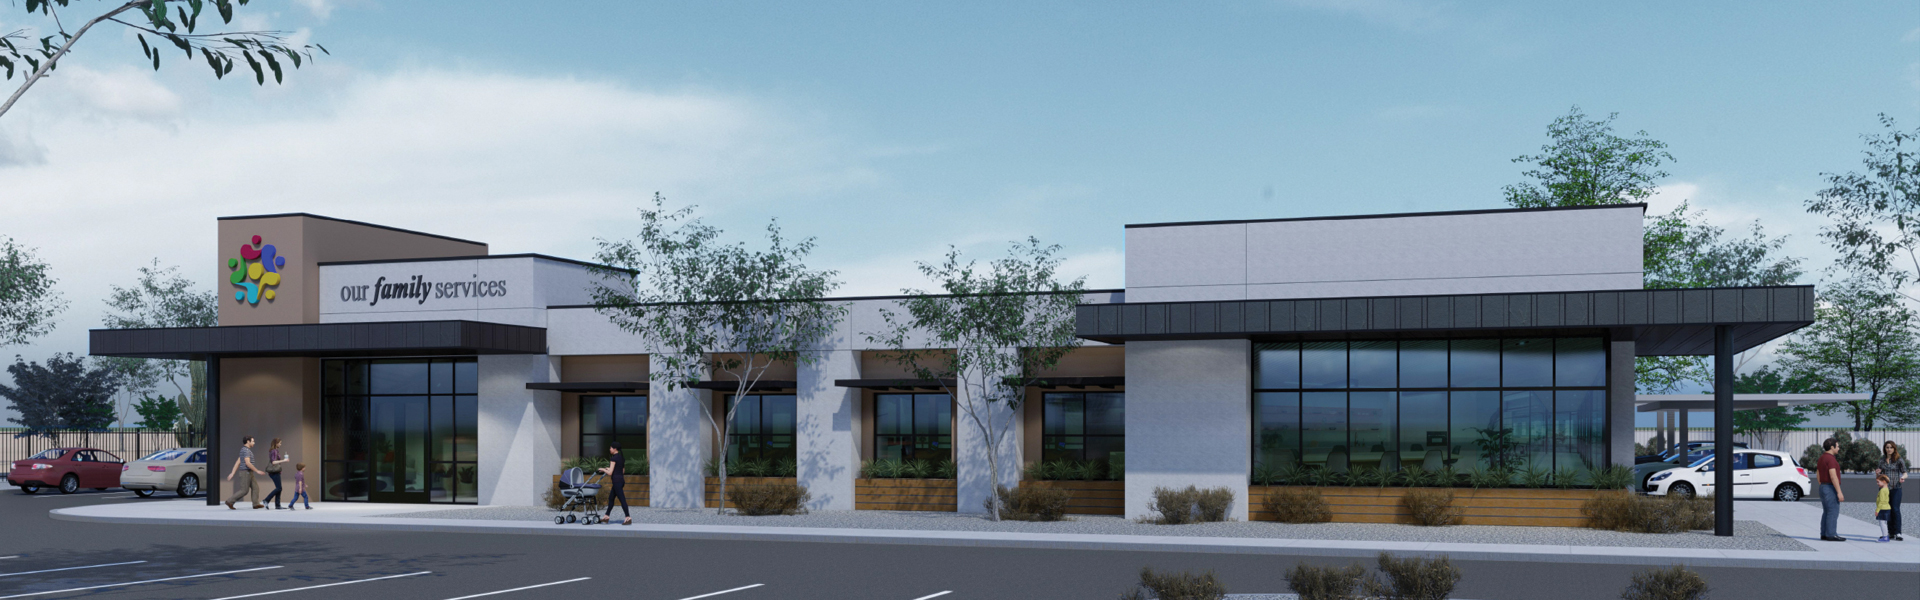 Our Family Services Rendering